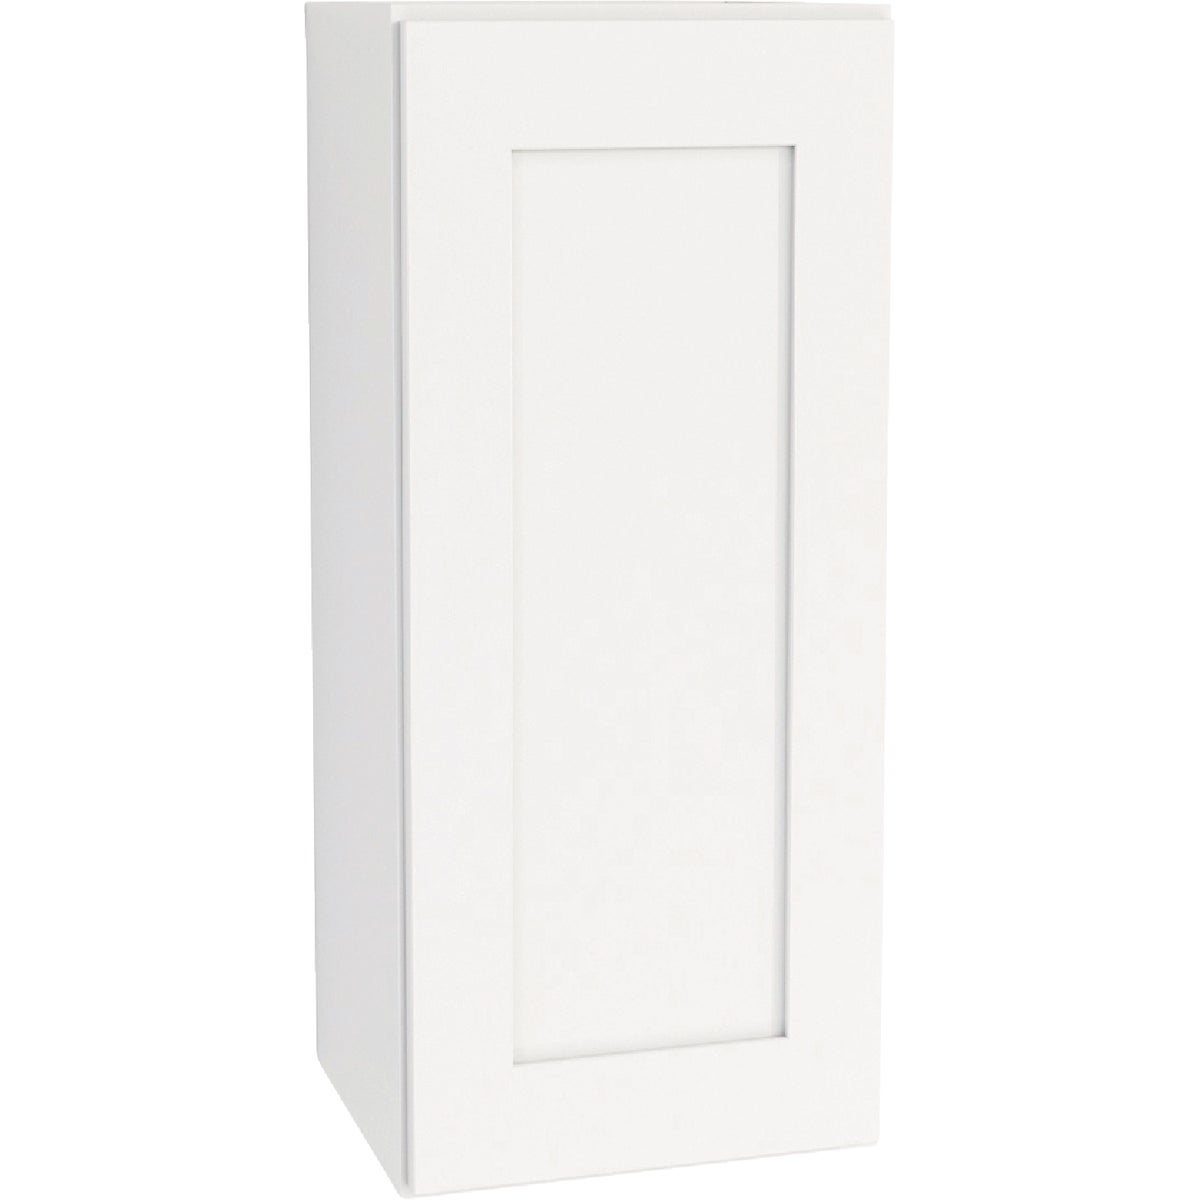 CraftMark Plymouth Shaker 12 In. W x 12 In. D x 30 In. H Ready To Assemble White Wall Kitchen Cabinet